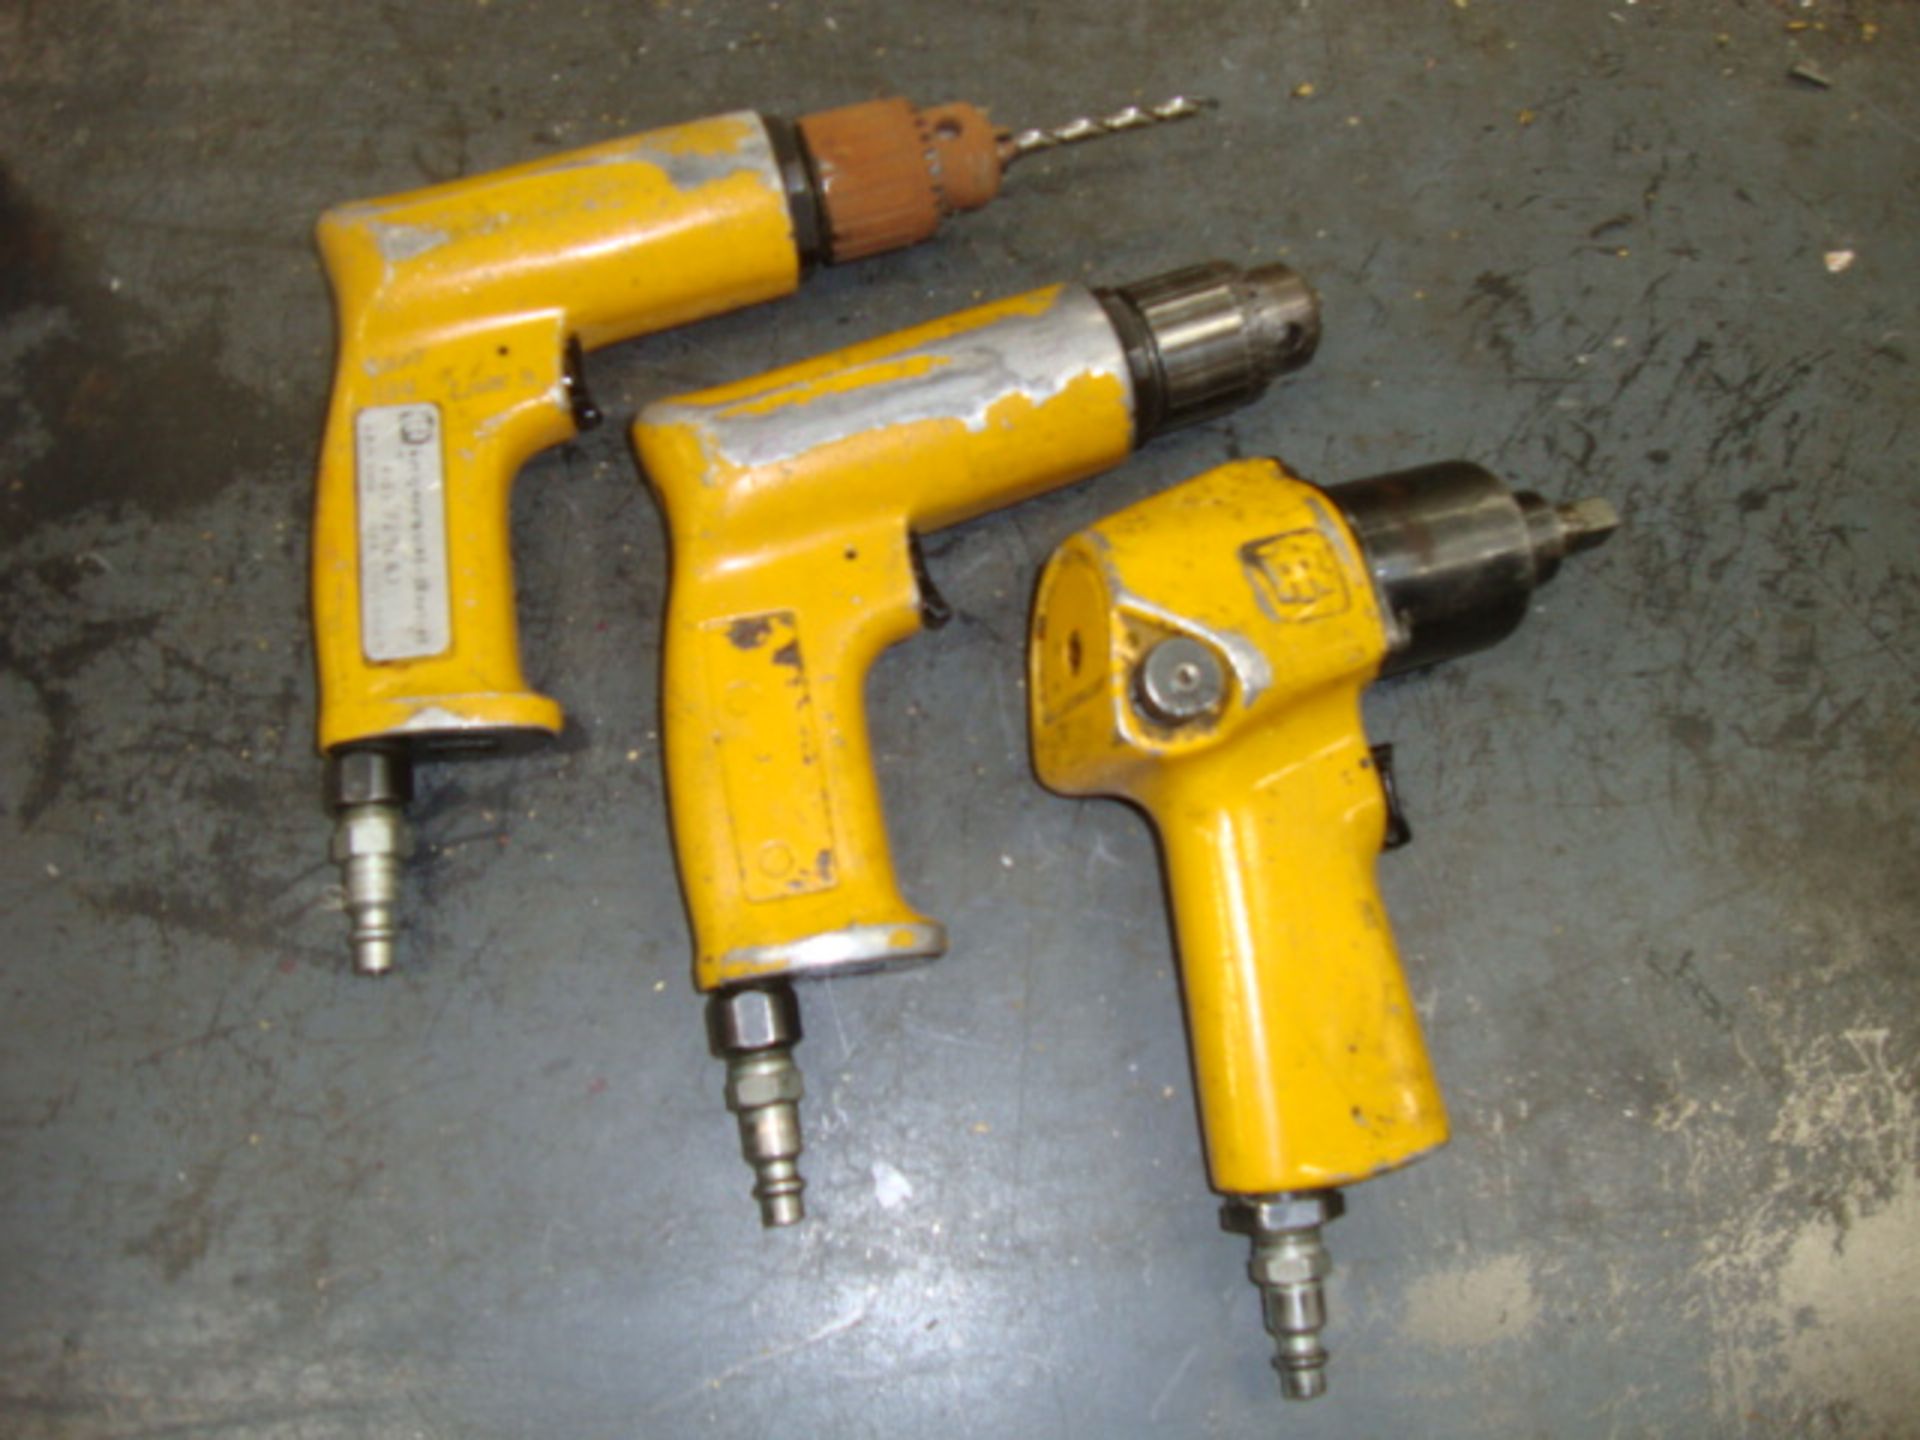 Lot of 3 Ingersoll Rand Pneumatic Tools, 2 - 3/8" Drill and 1 - 3/8" Driver